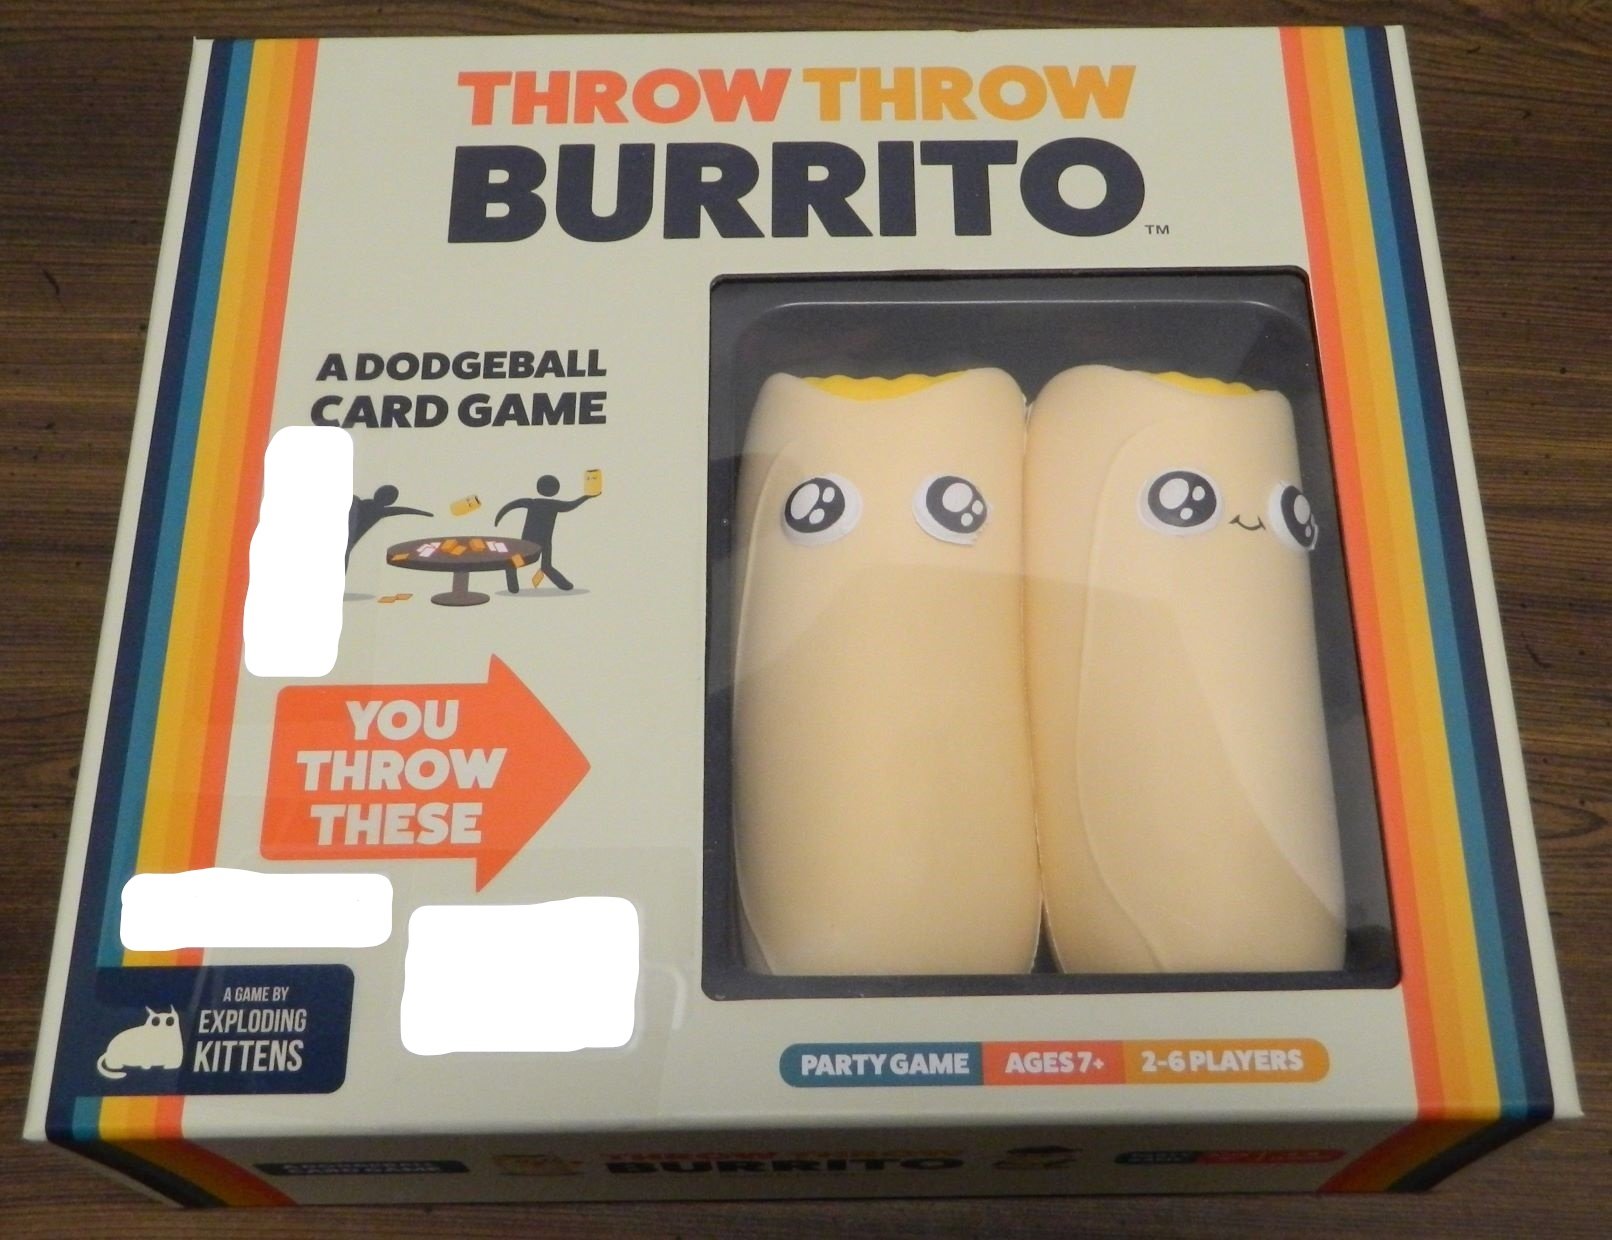 Goose Gang - Throw Throw Burrito is back in stock! And check out